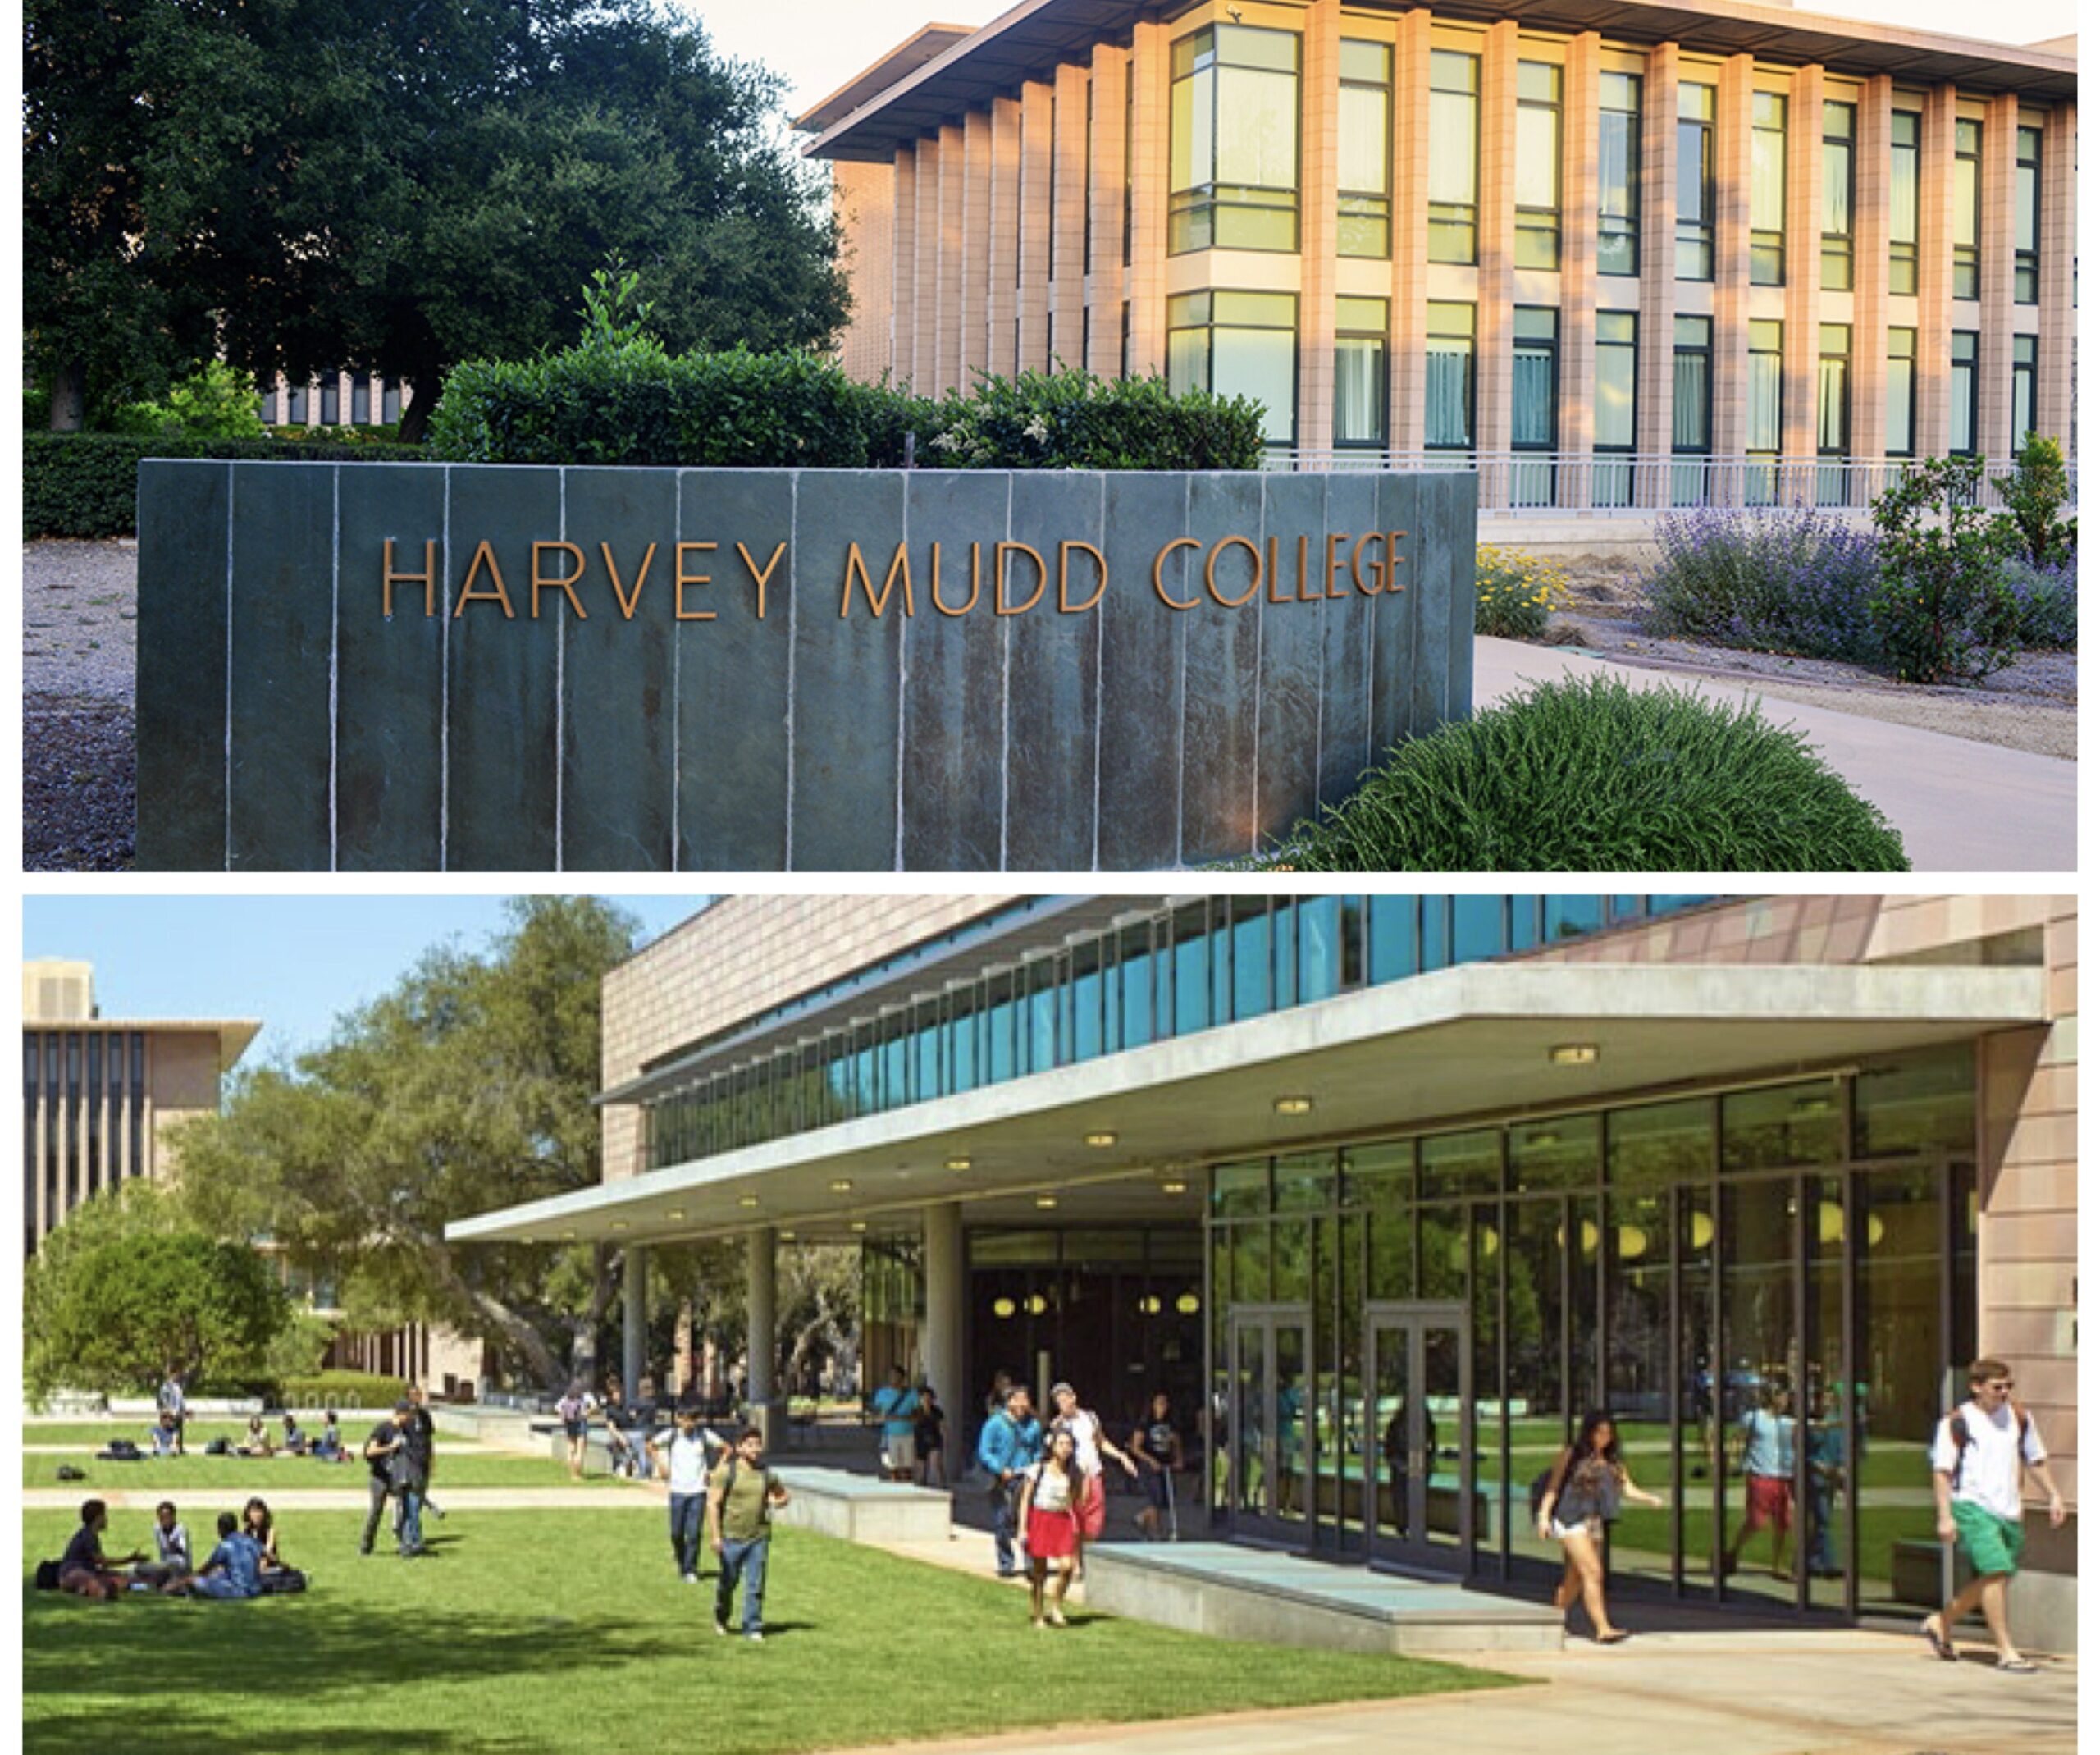 harvey-mudd-college-acceptance-rate-tuition-ranking-scholarships-programs-address-fees